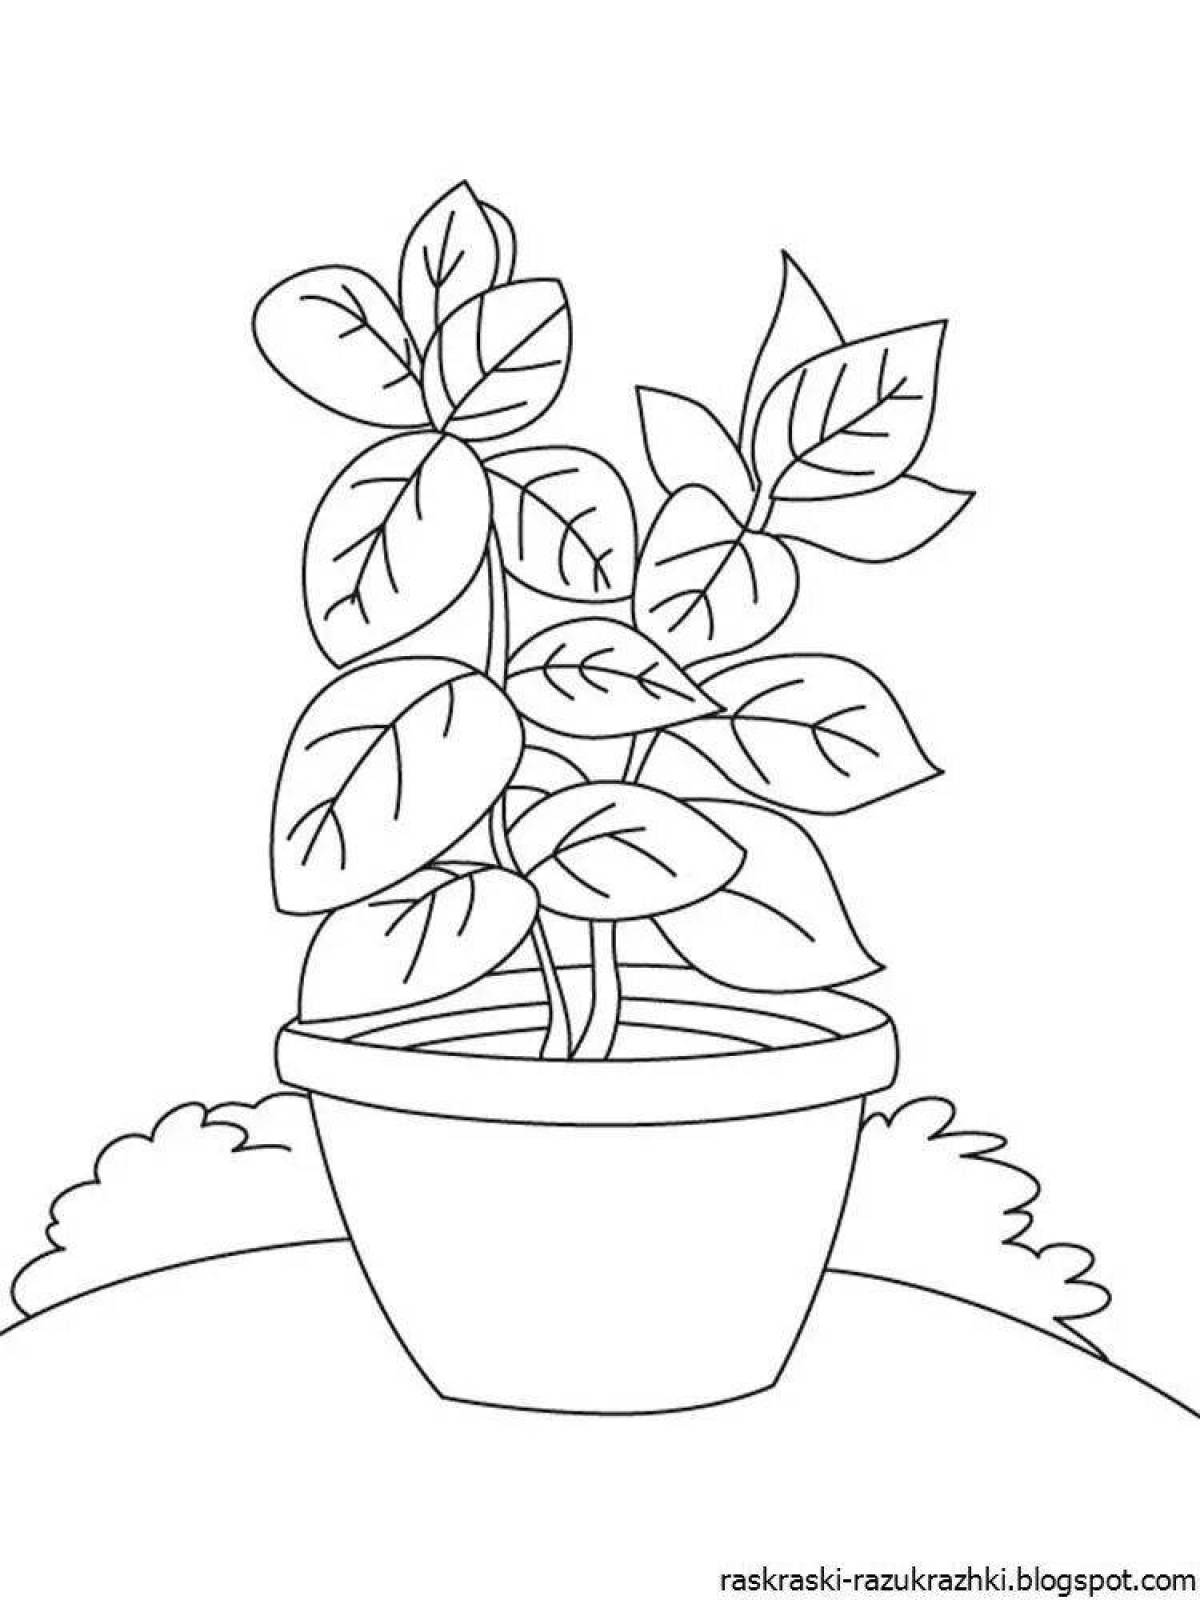 Amazing coloring pages of indoor plants for kids